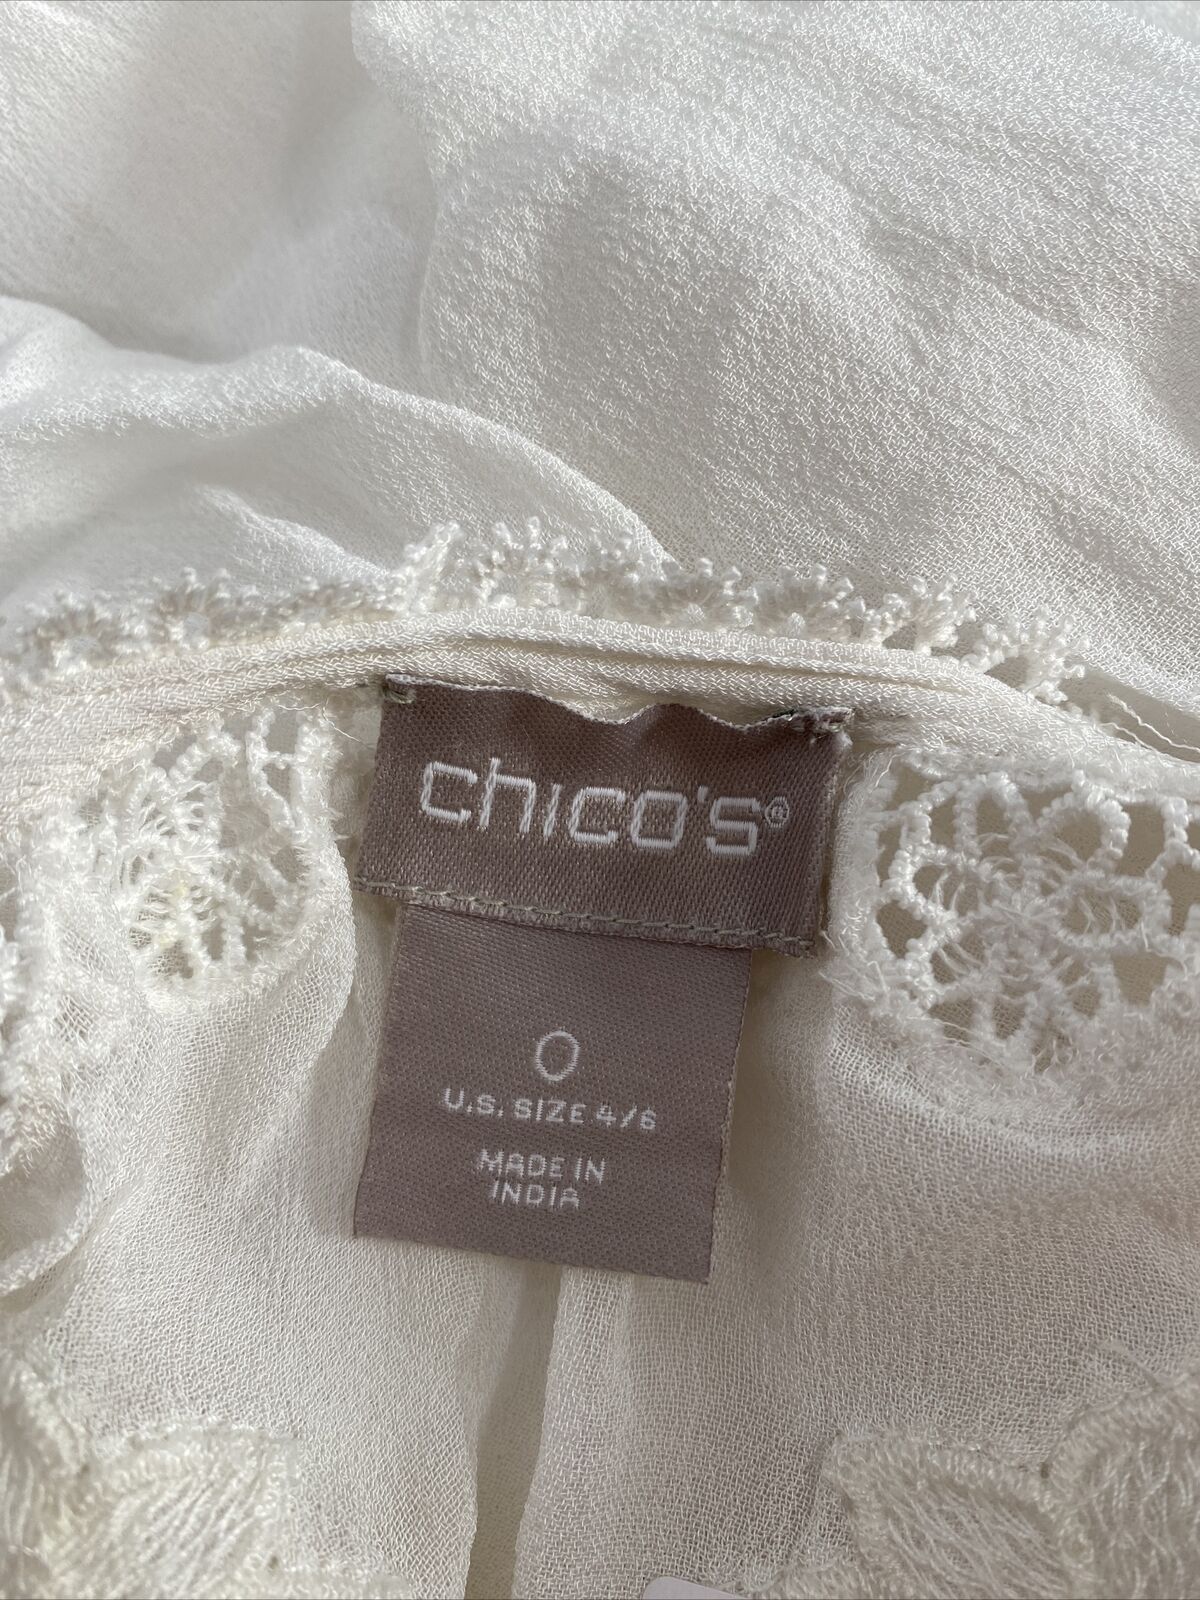 Chico's Women's White Sheer Lace Beaded 3/4 Sleeve Blouse - 0 (4/6)